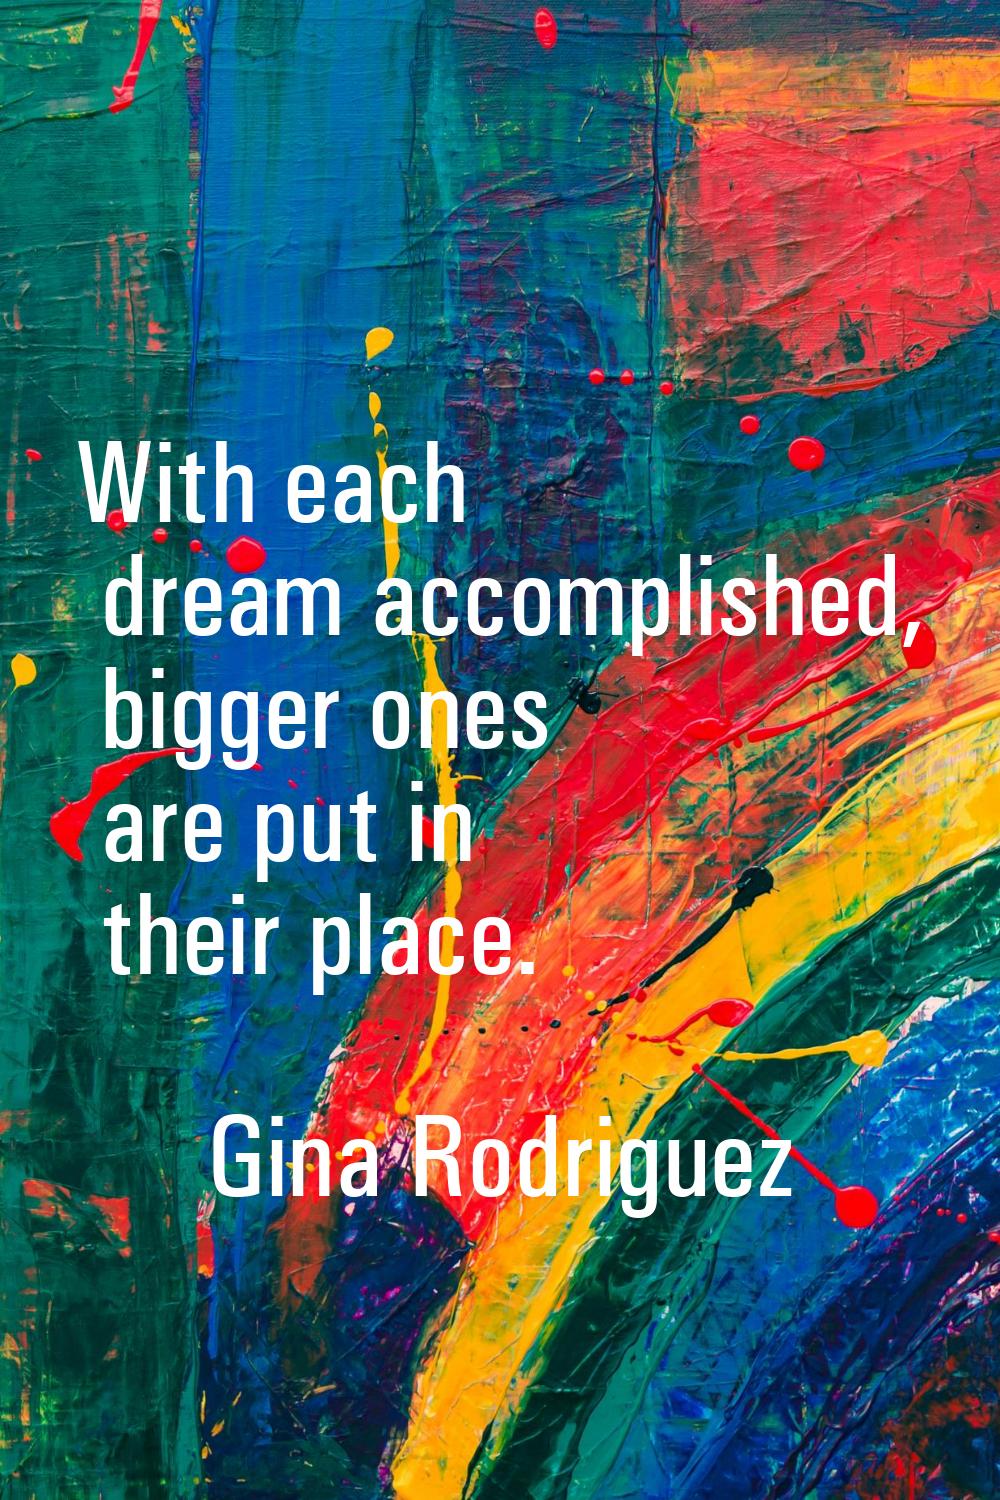 With each dream accomplished, bigger ones are put in their place.